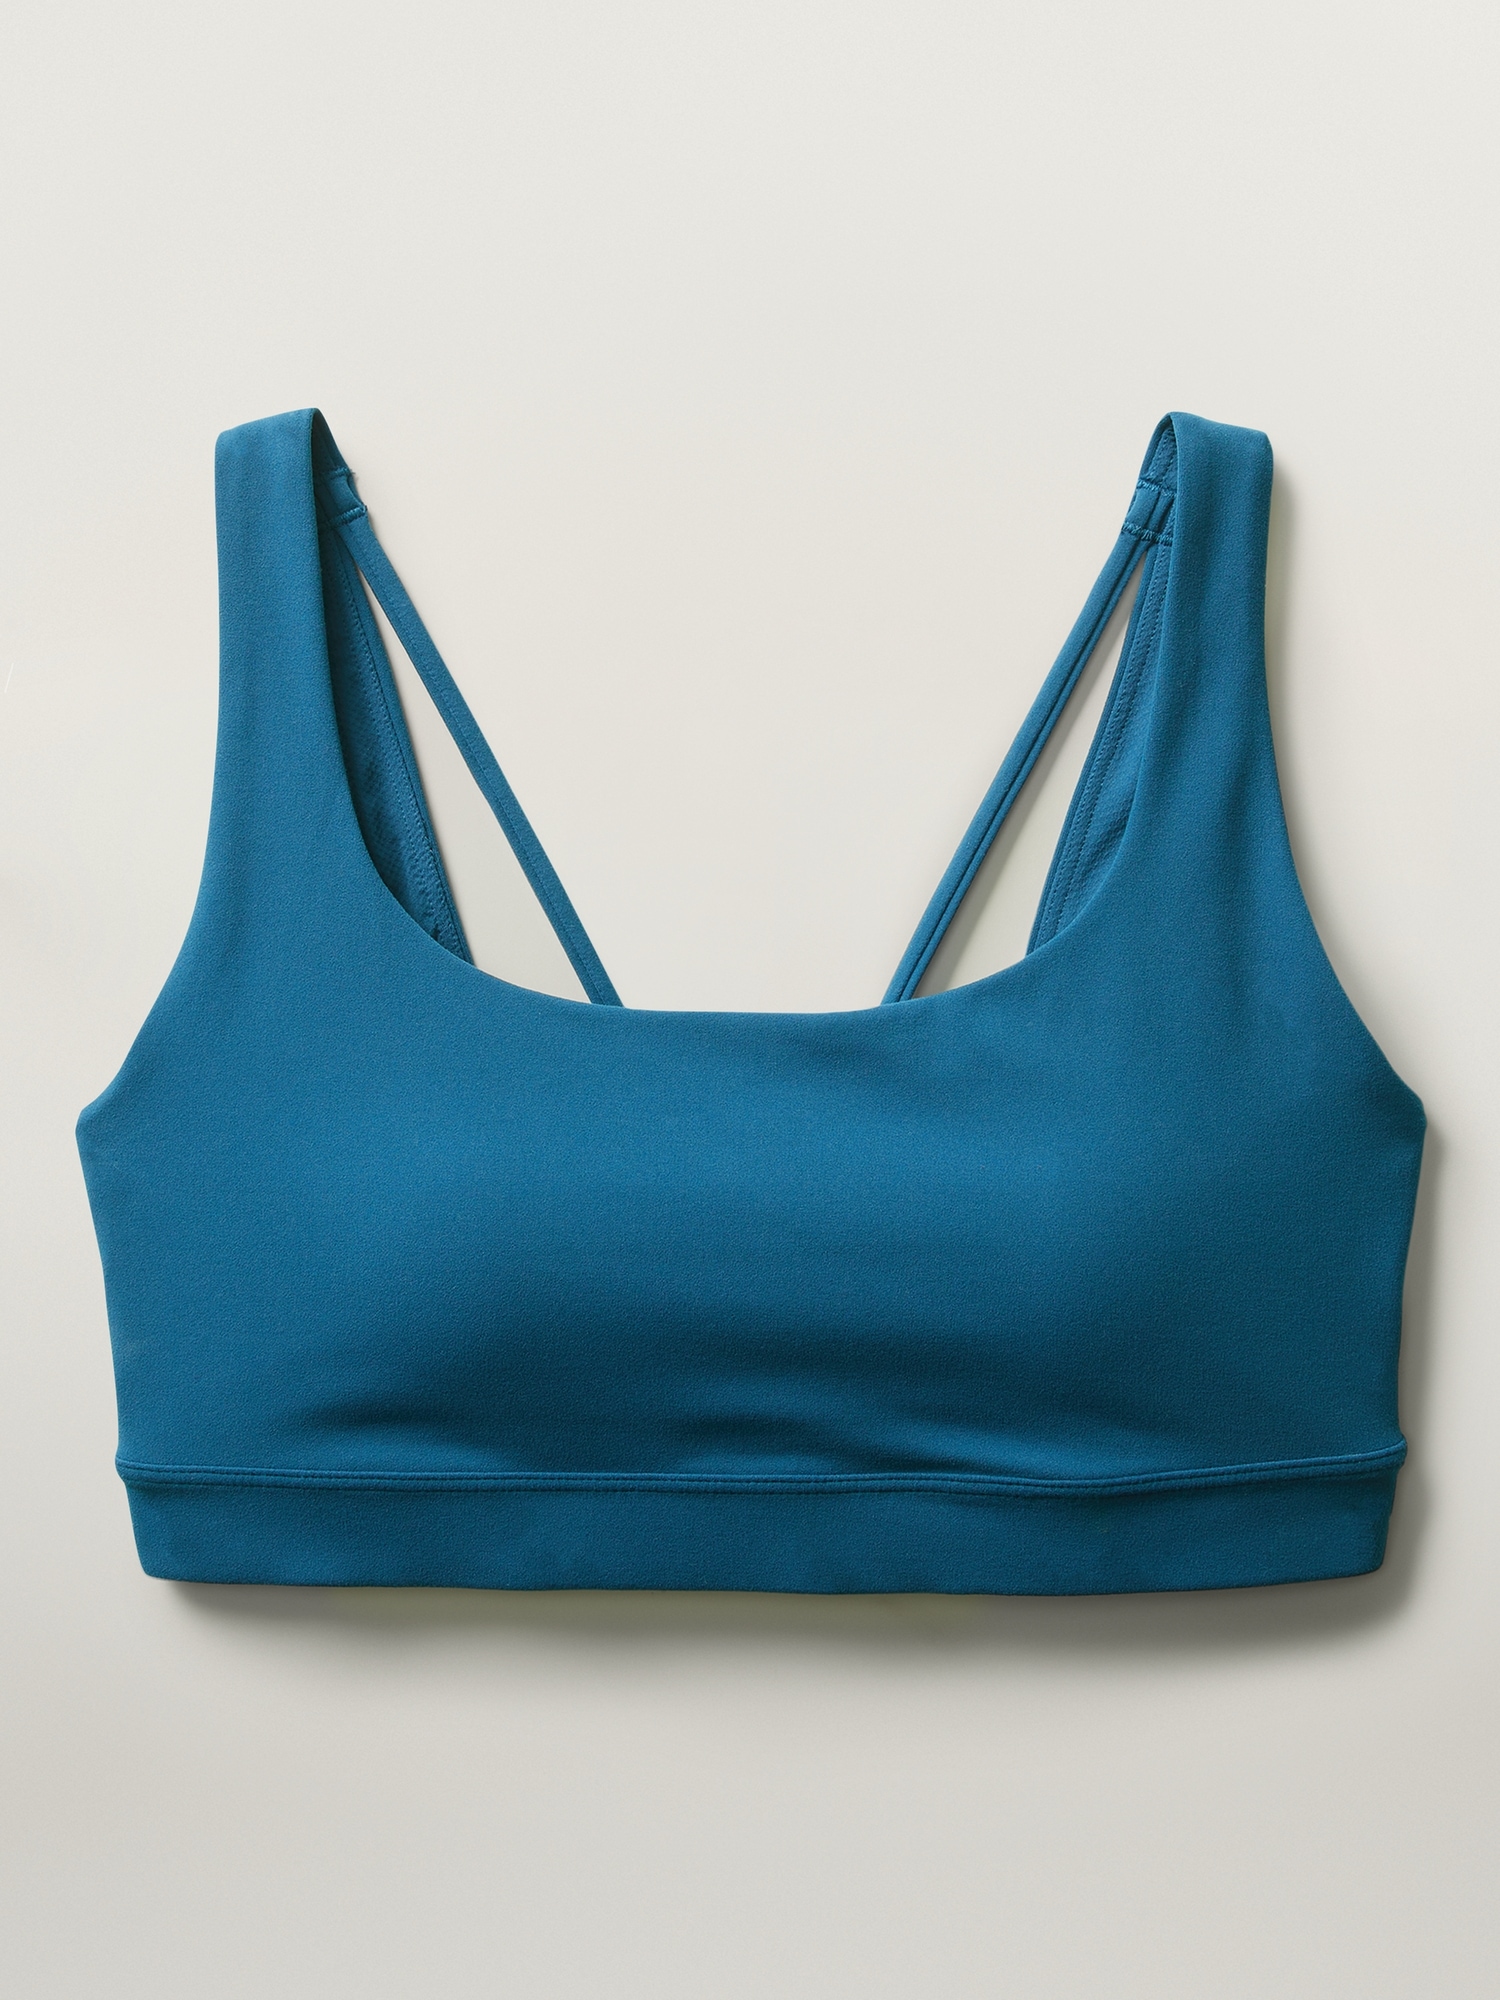 Athleta Exhale Bra in Opaque Lilac size 1X - $35 - From Marisa